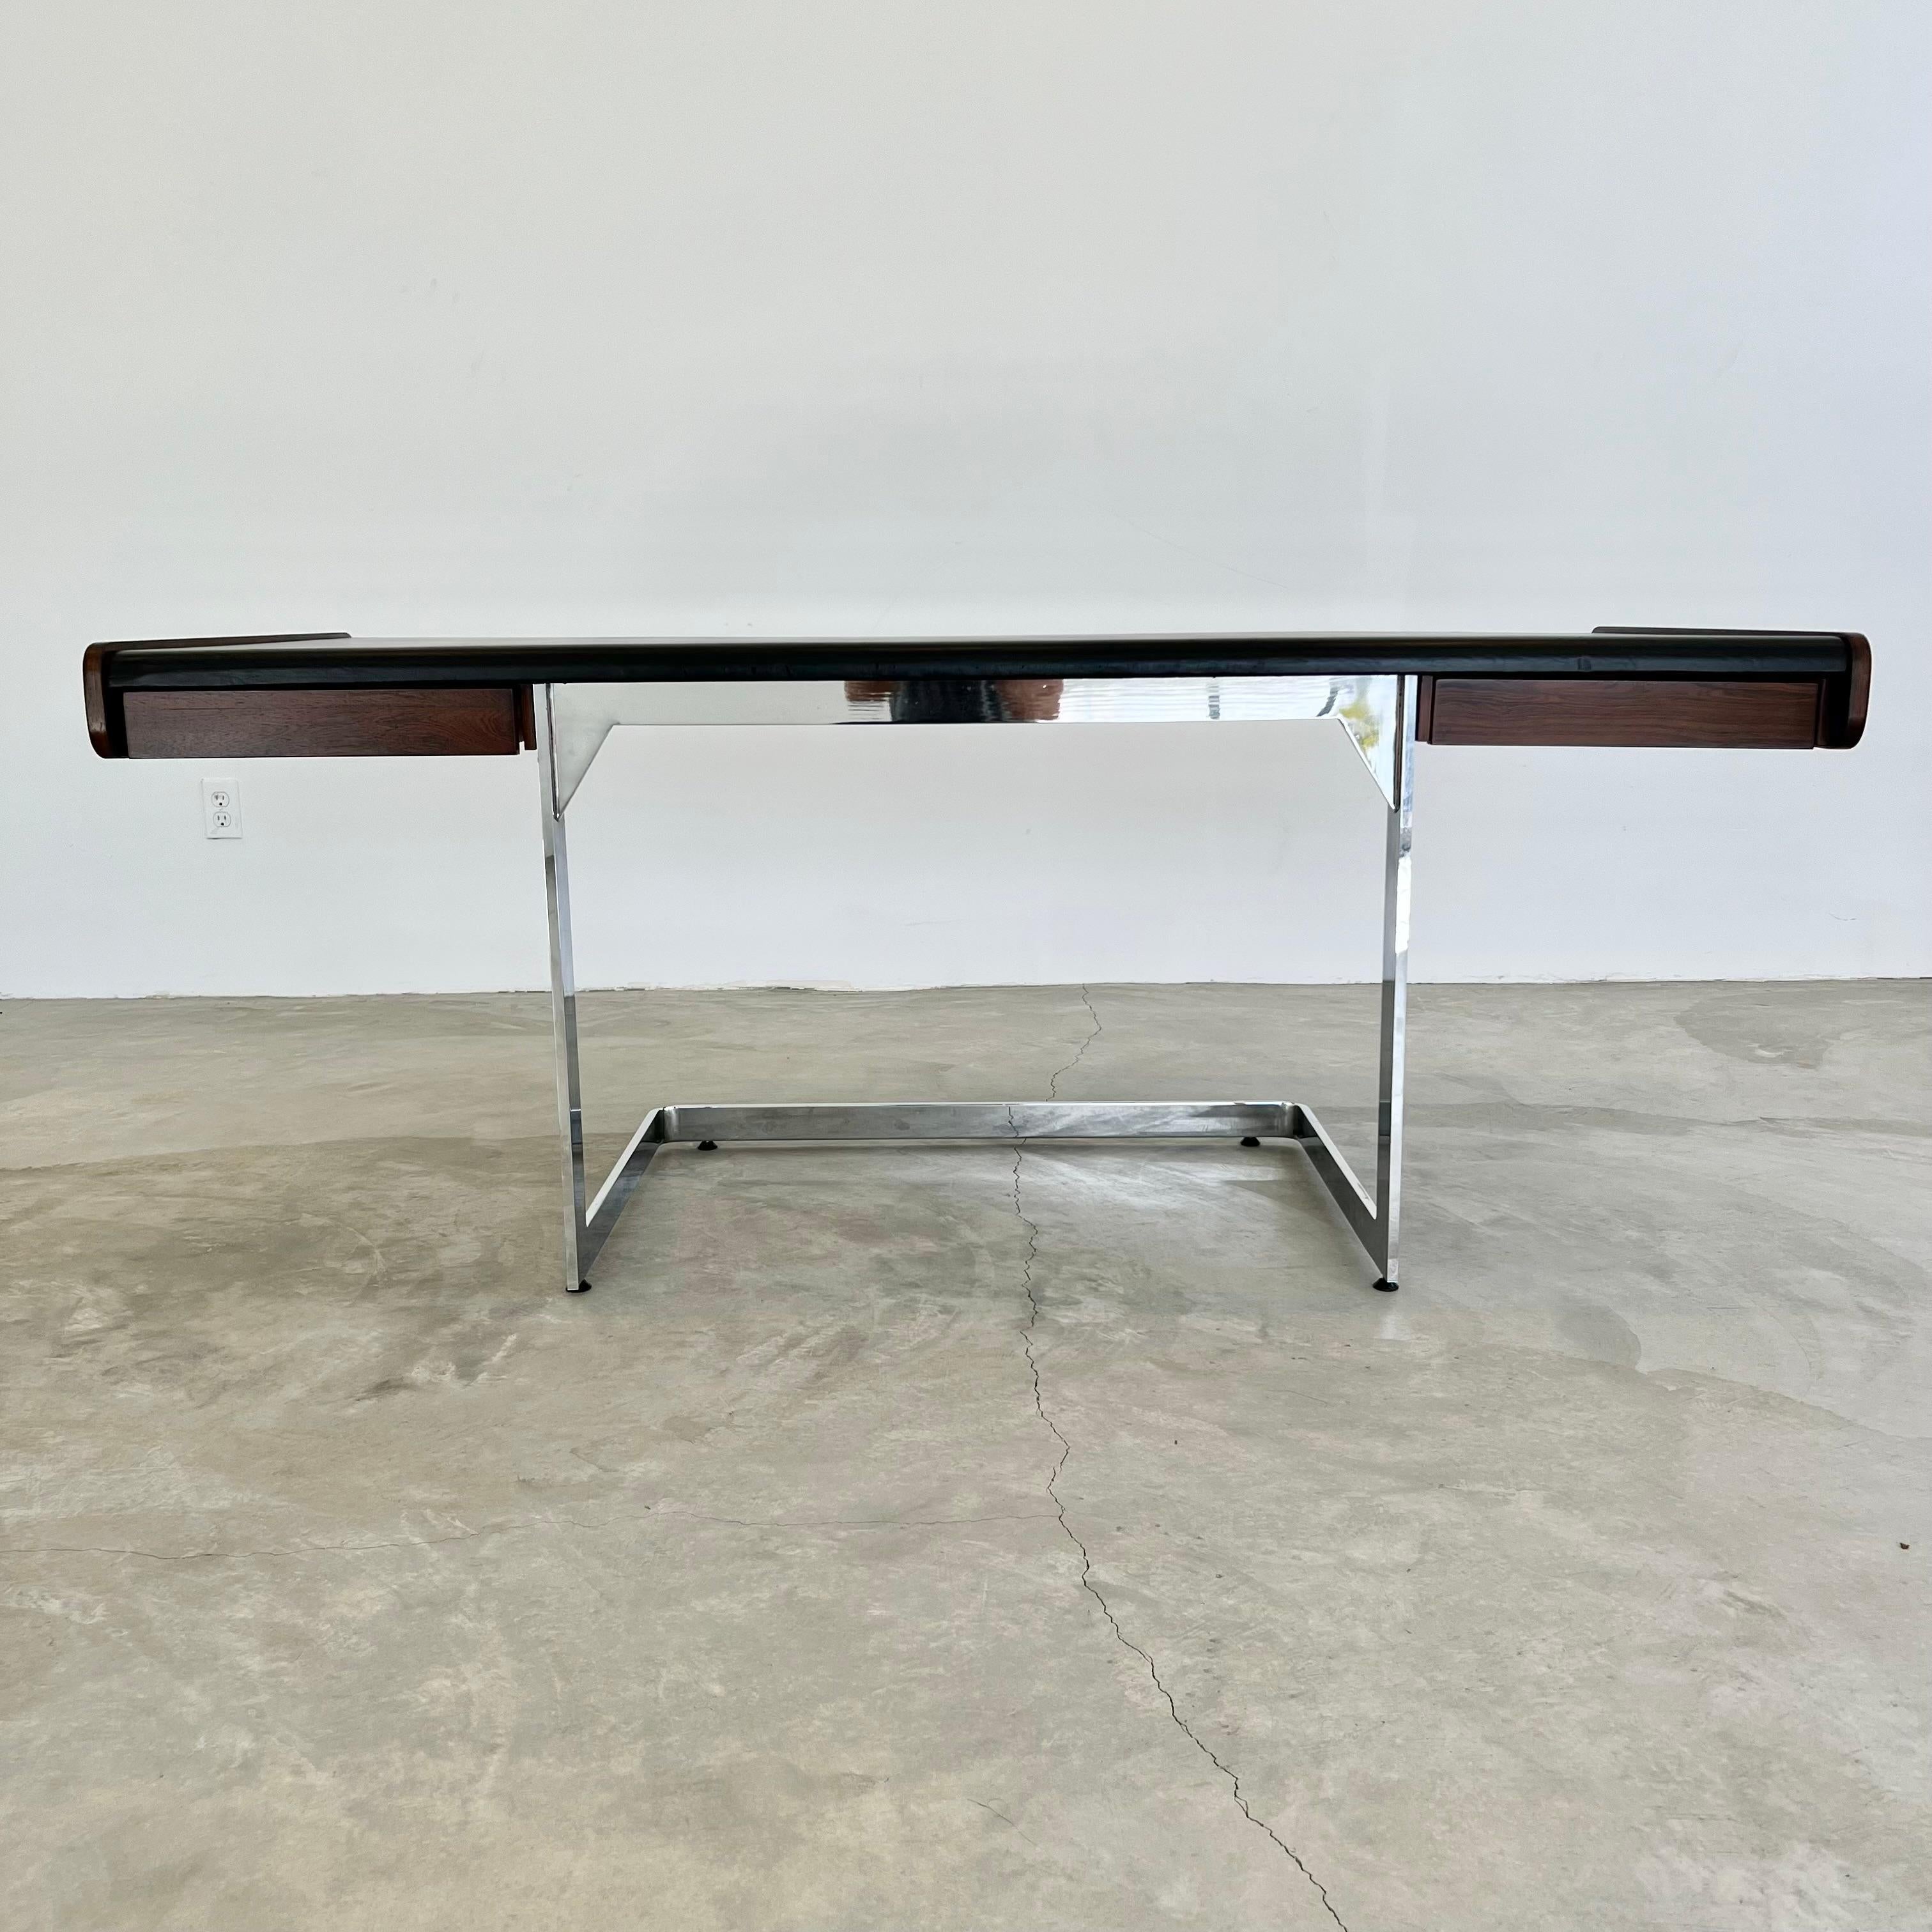 Stunning desk by Ste. Marie & Laurent made in the 1970s, Canada. Floating rosewood and vinyl desk with angular chrome base. One-drawer flanks each side of the desk. Black vinyl top and wood in good condition with some wear as shown. Elegant lines